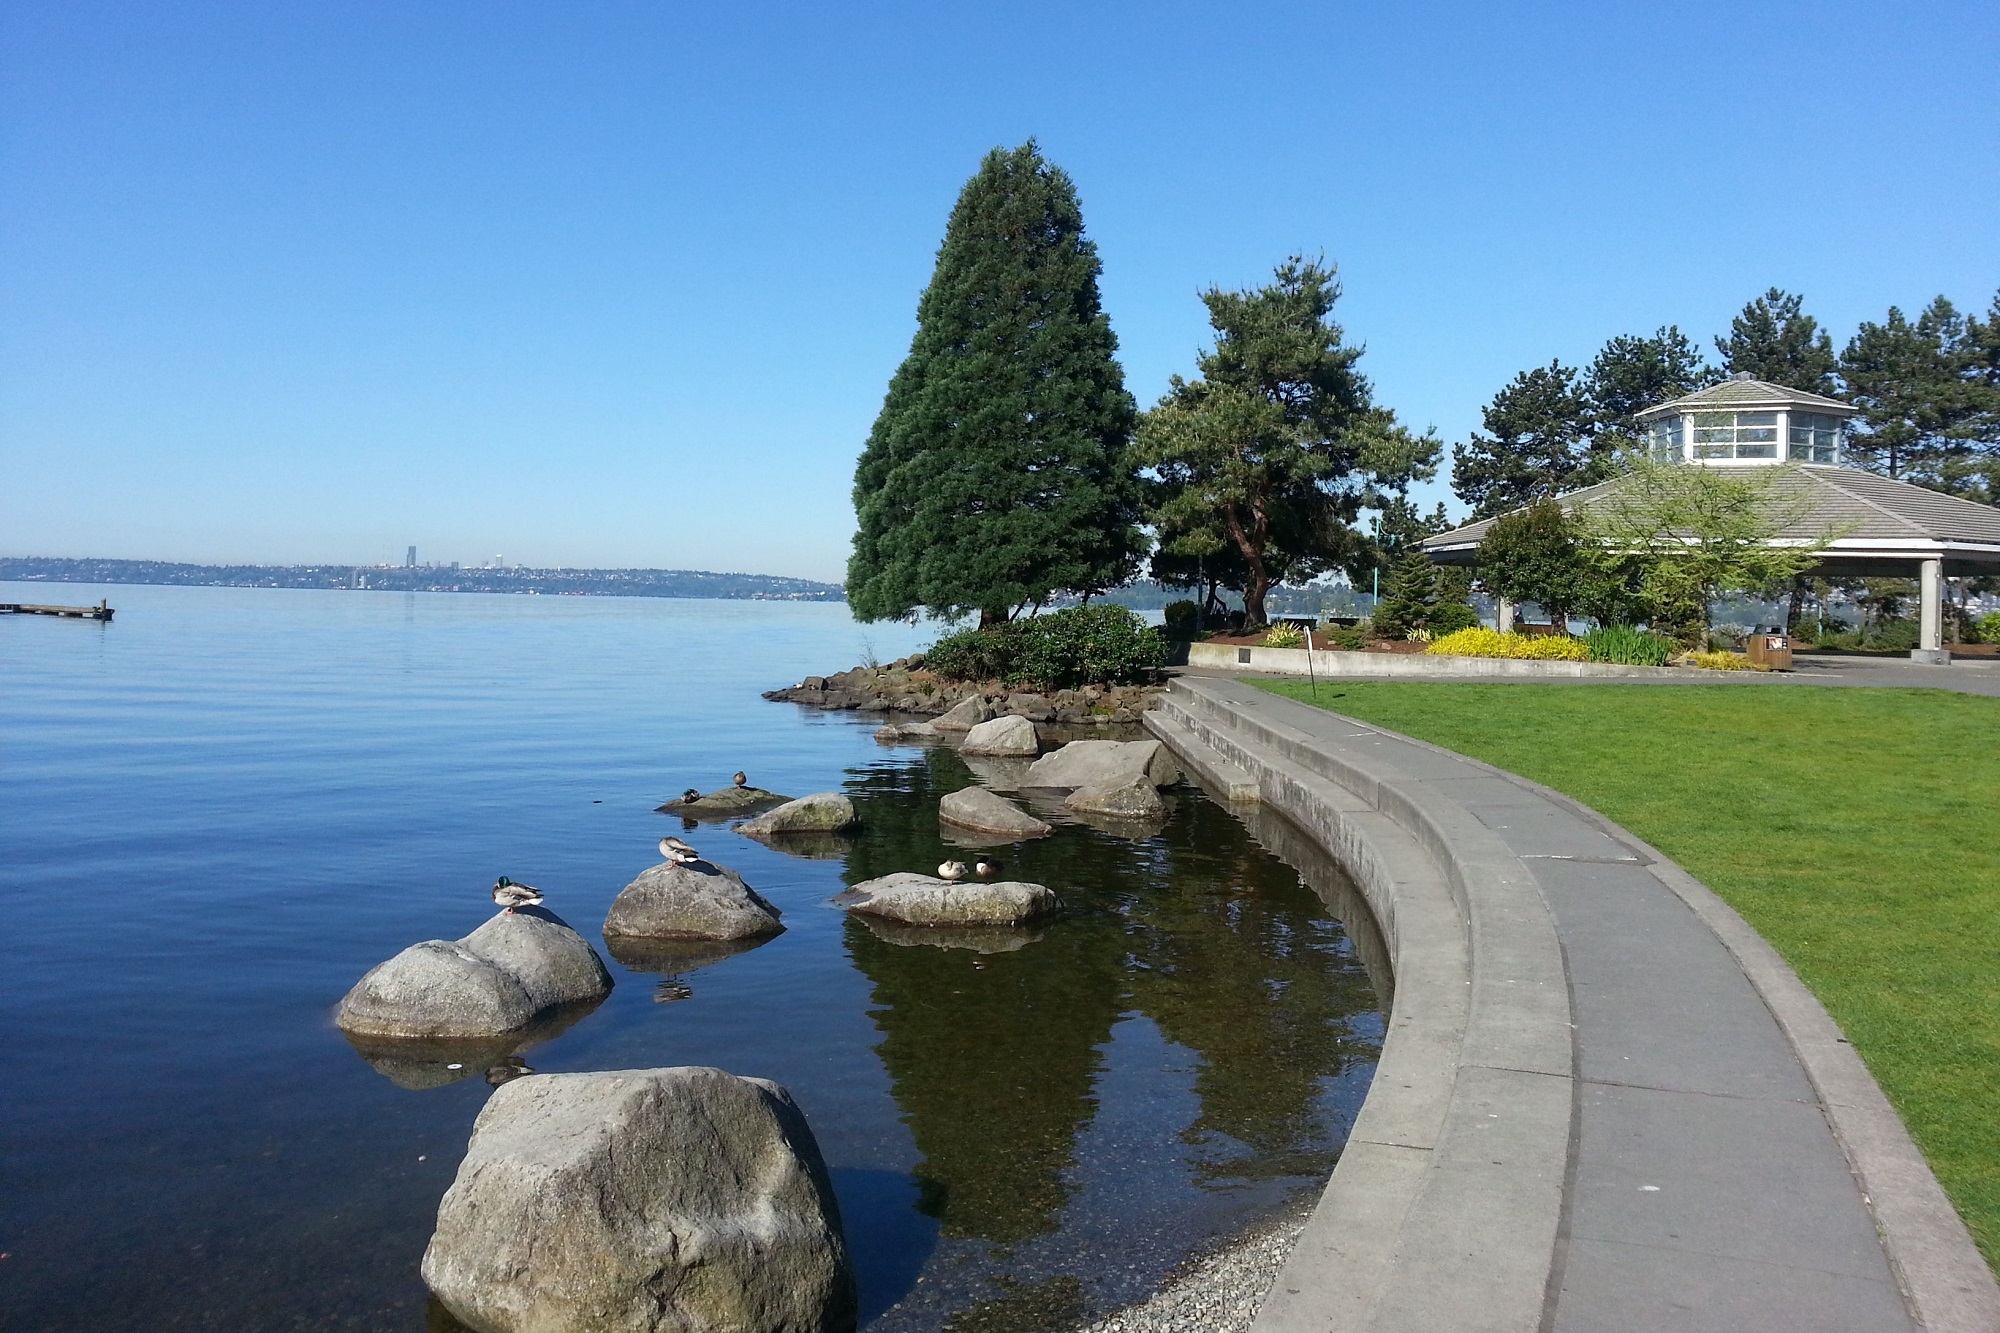 riverside view of Park Kirkland with rocks, seagulls, and trees